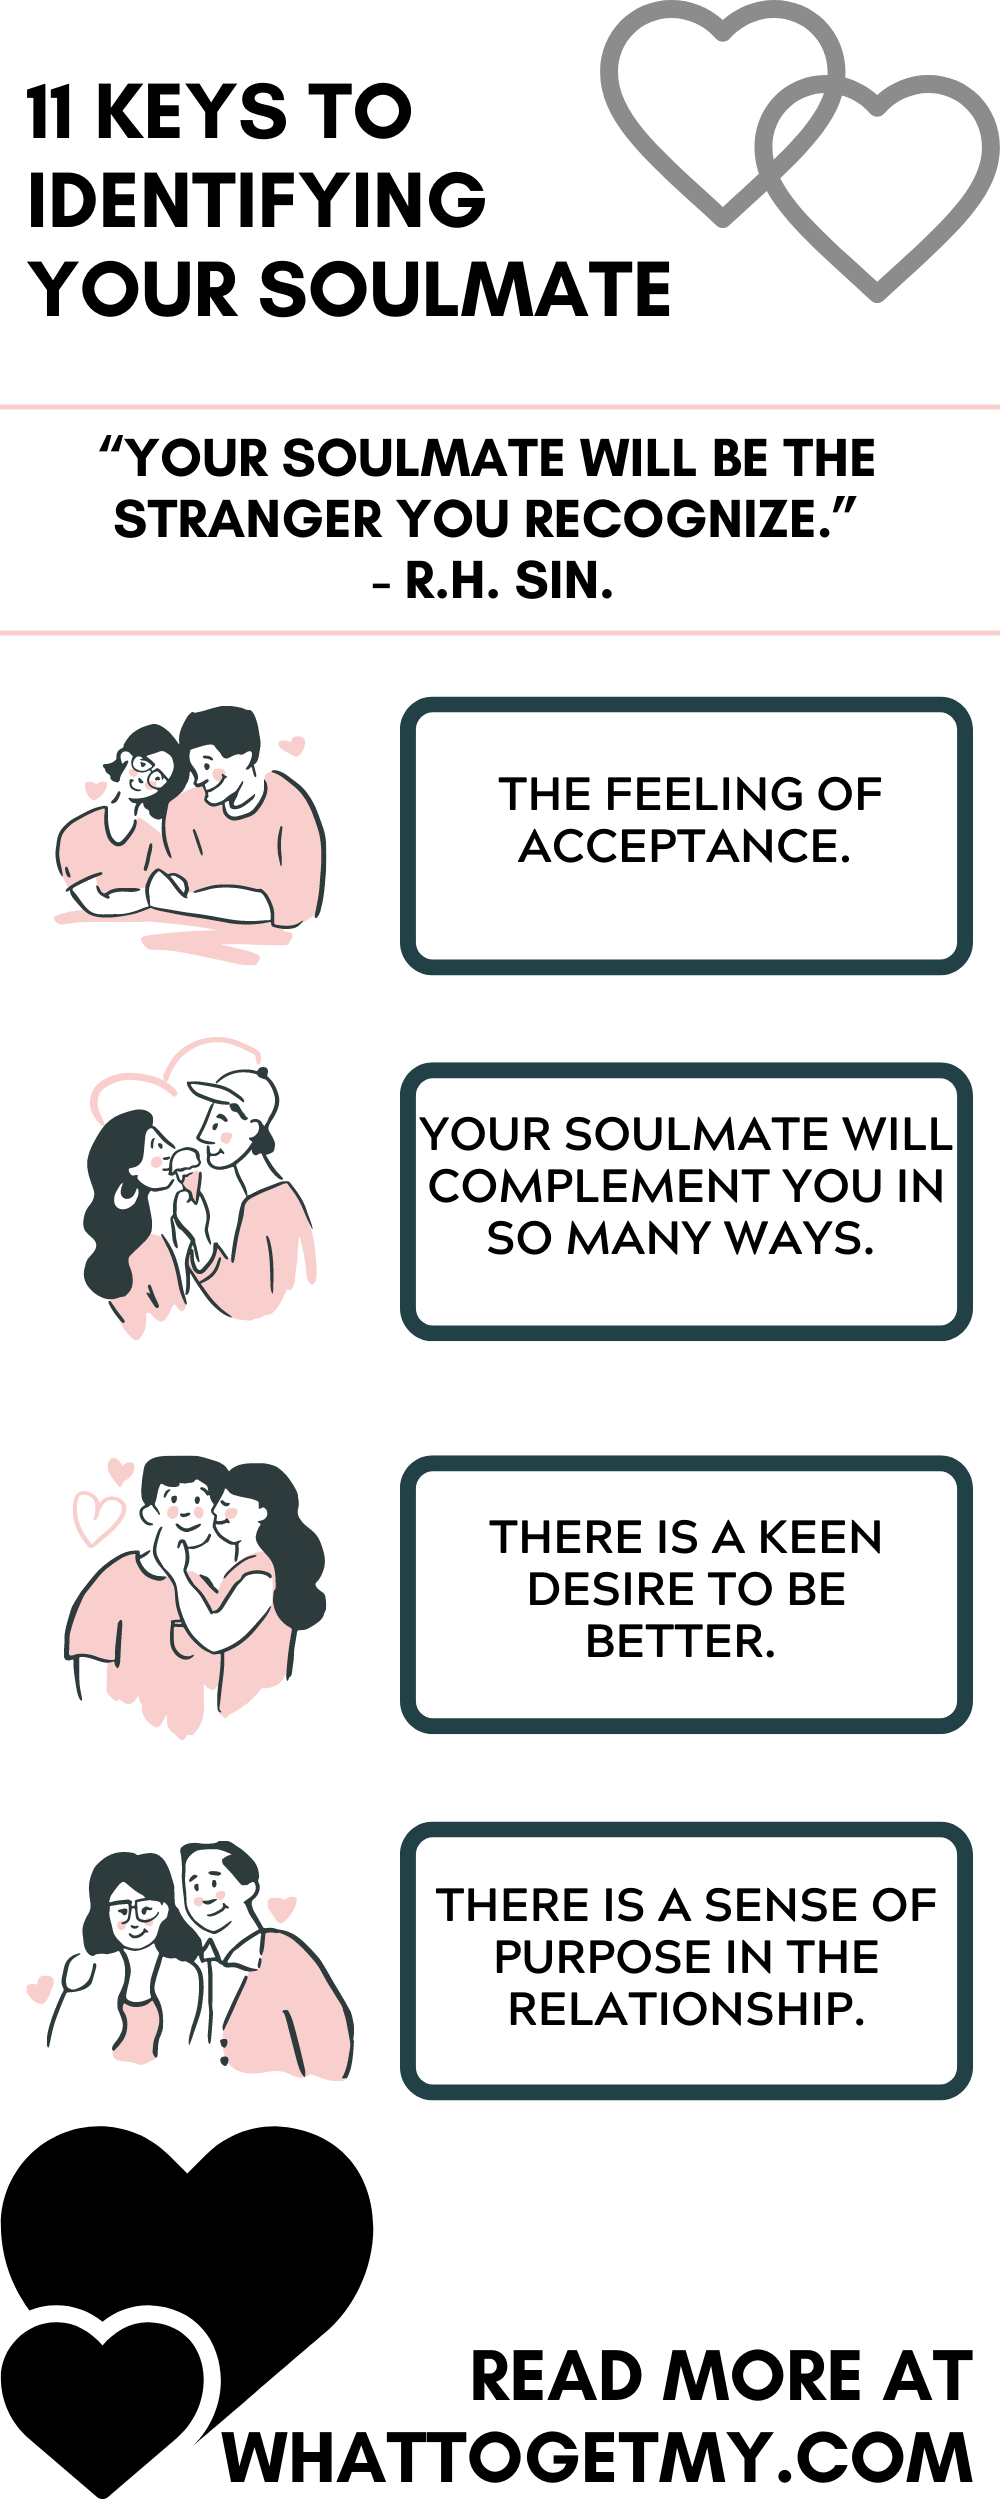 11 Keys to identifying your soulmate